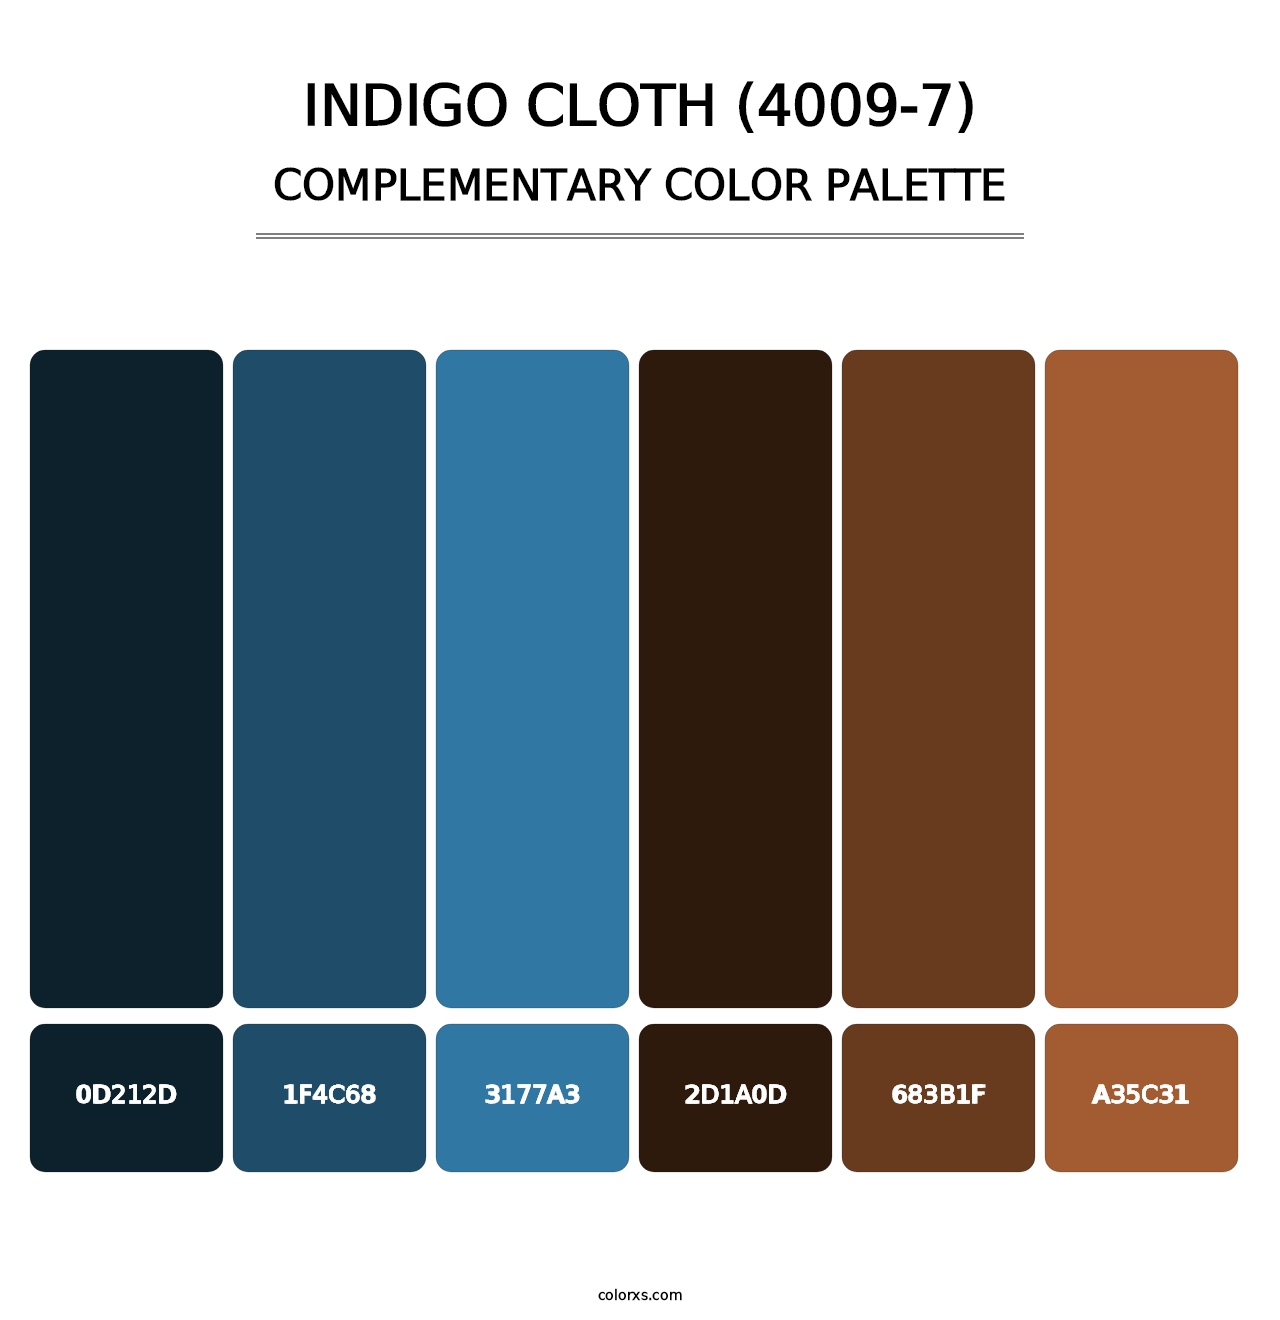 Indigo Cloth (4009-7) - Complementary Color Palette